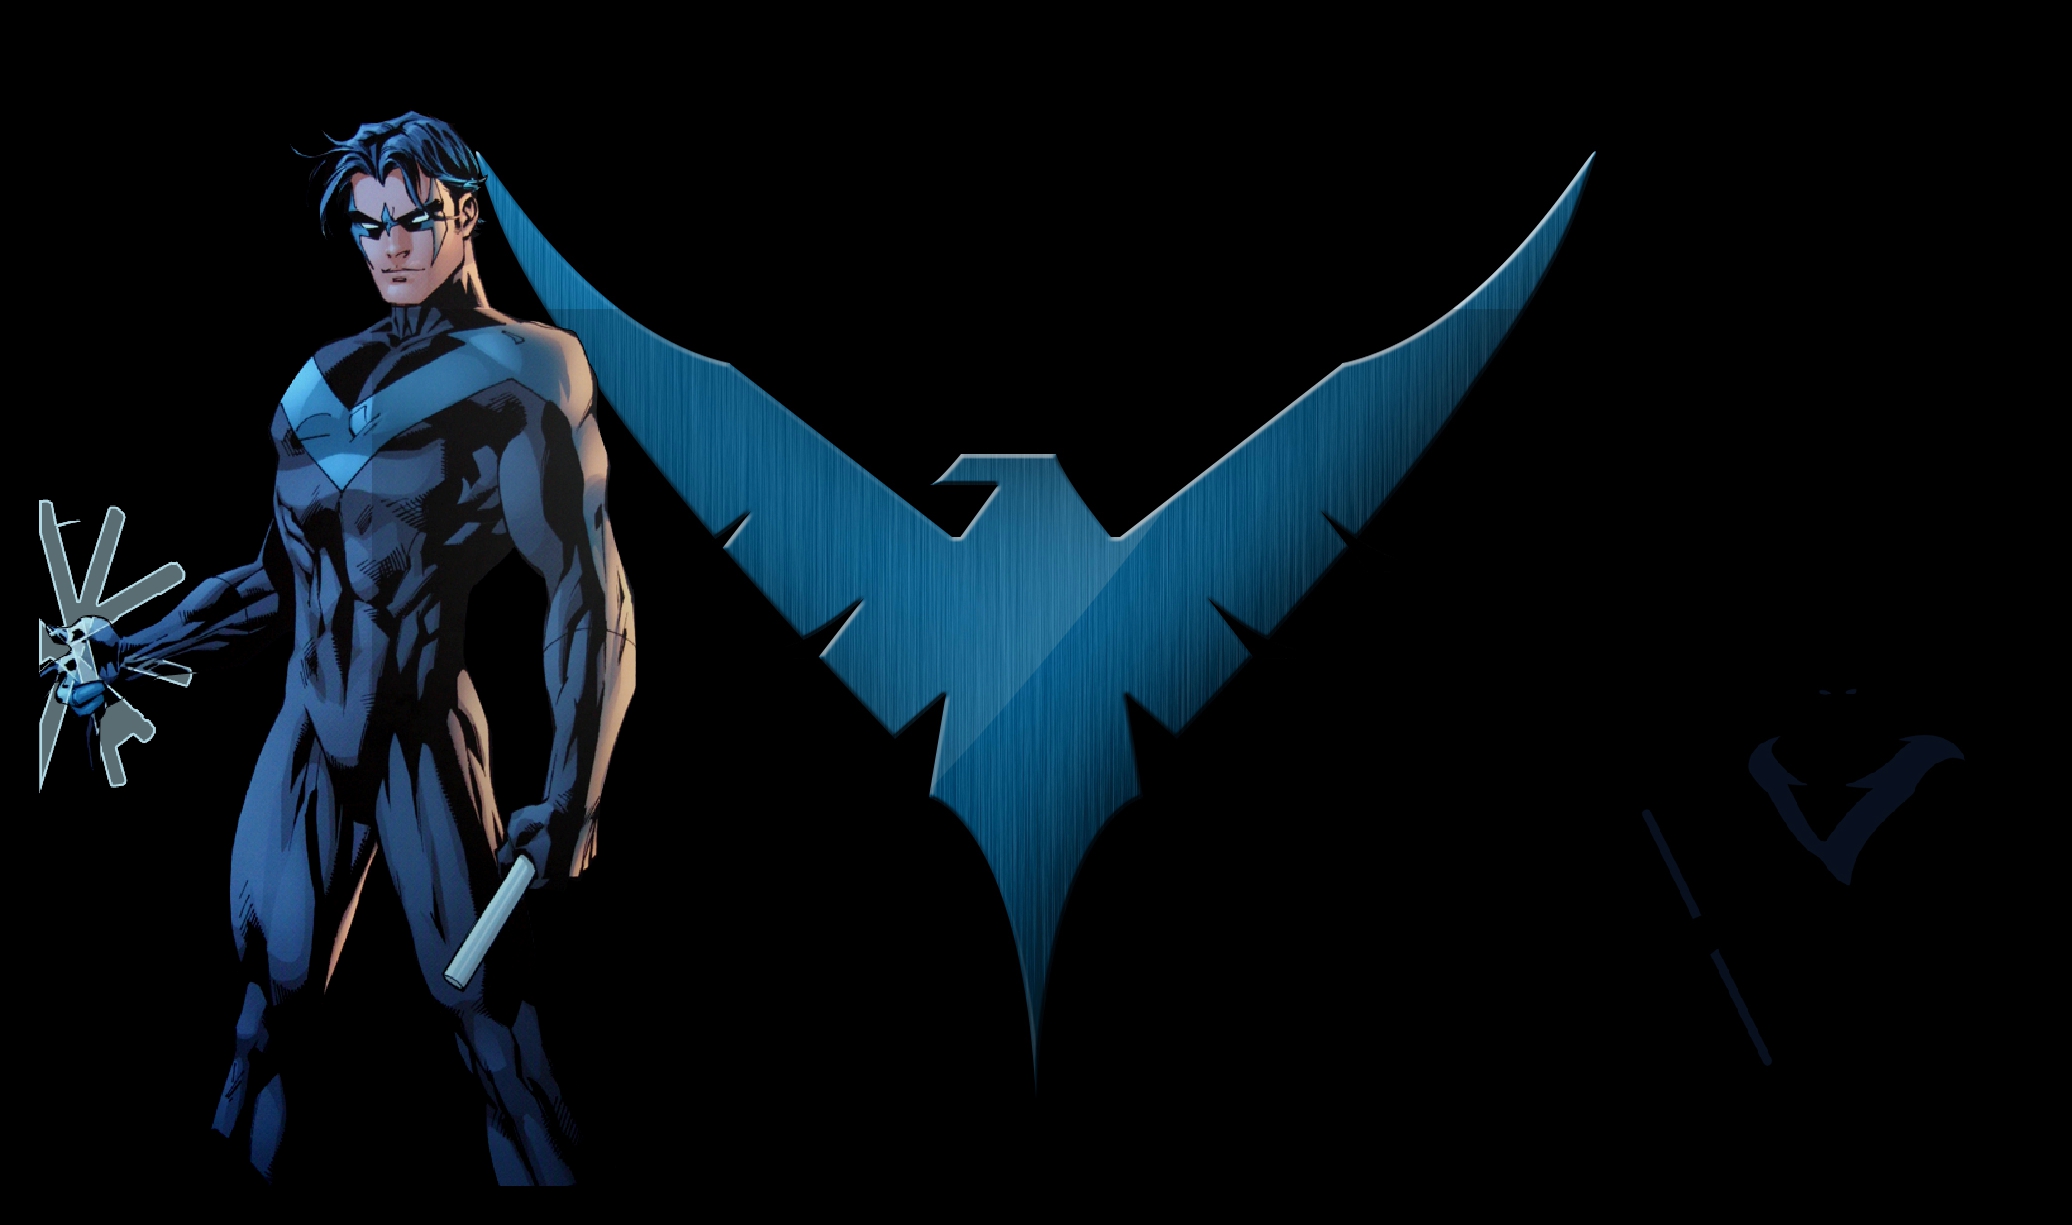 Nightwing Images. 